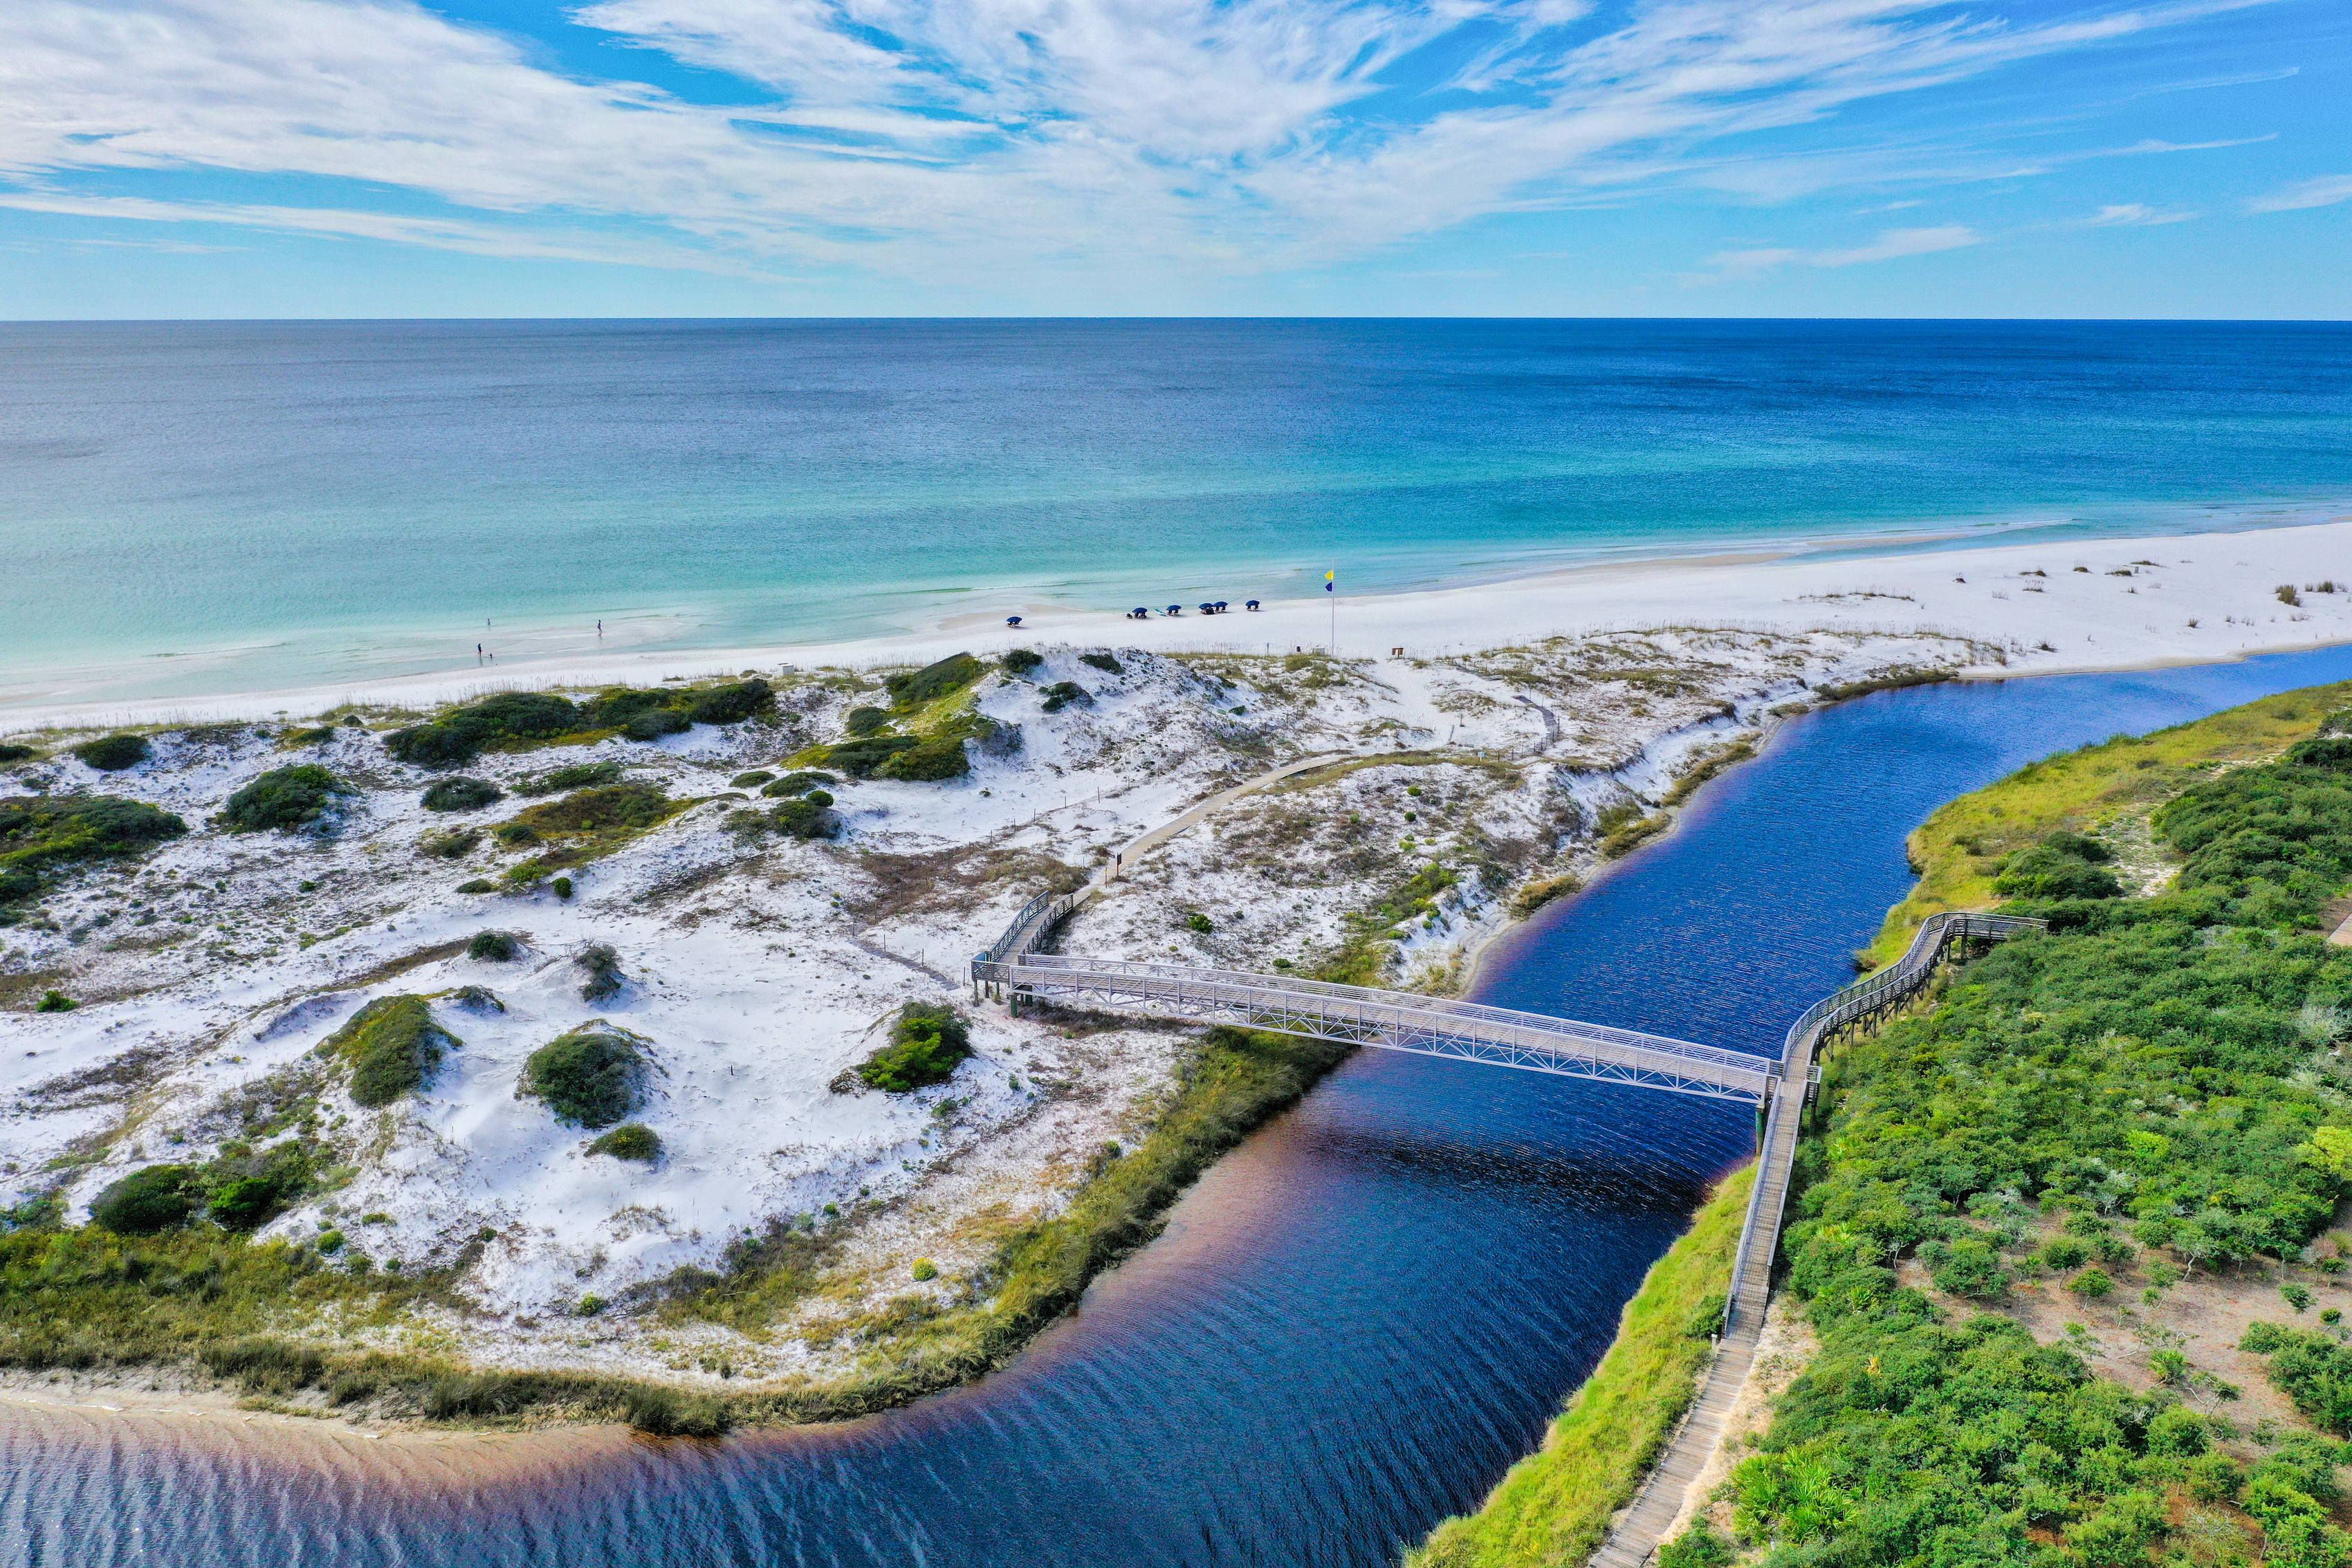 The beach and Gulf of Mexico around Watersound Beach showing a bridge to the sand dunes over a dune lake outfall